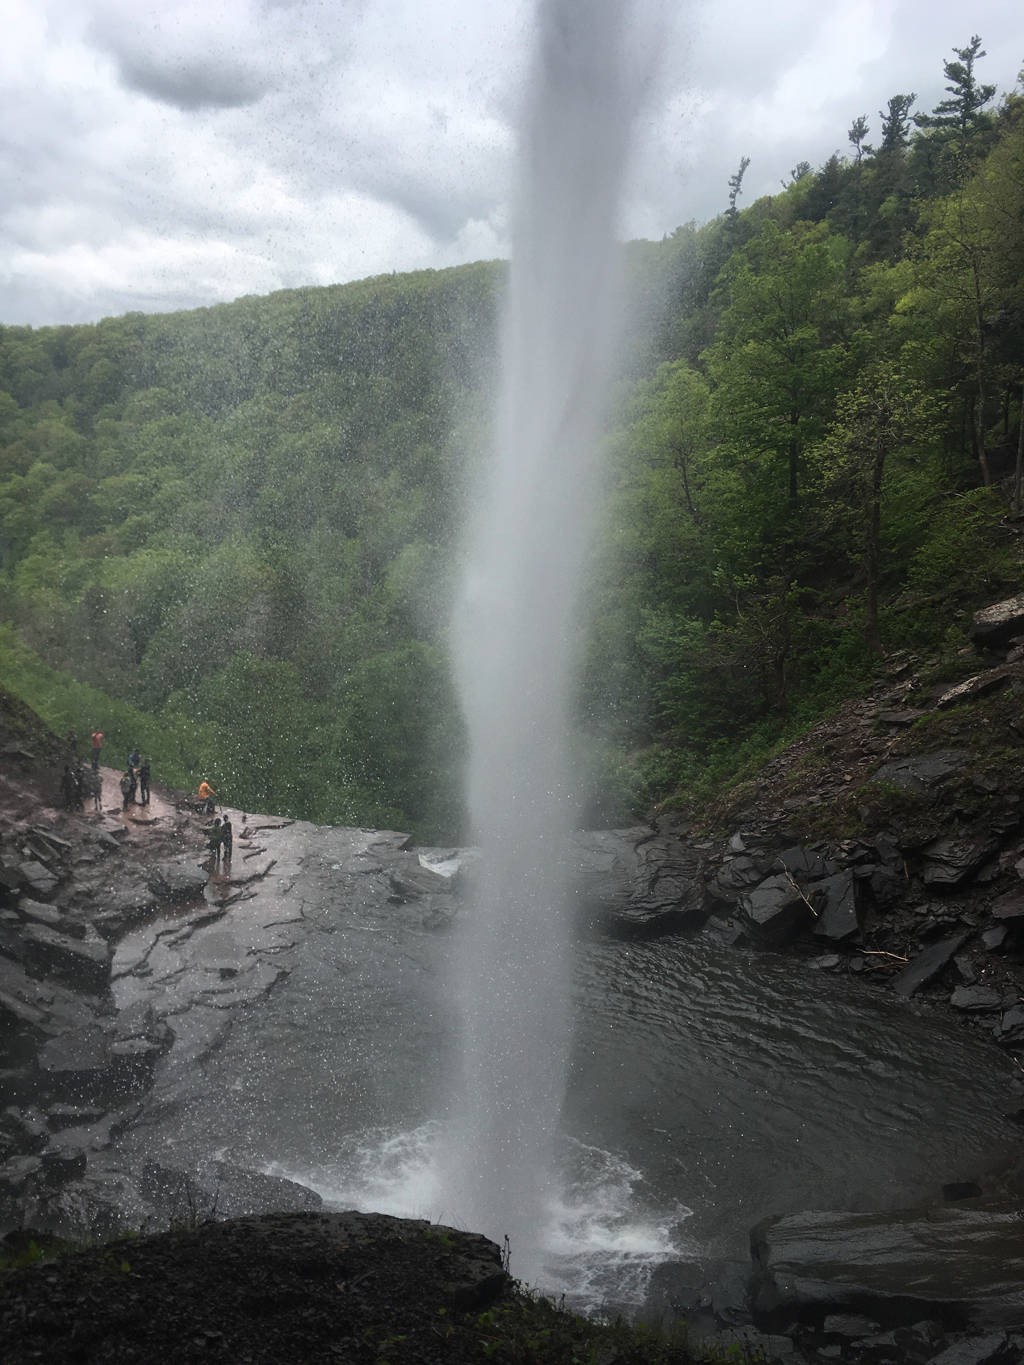 Behind the Kaaterskill Falls